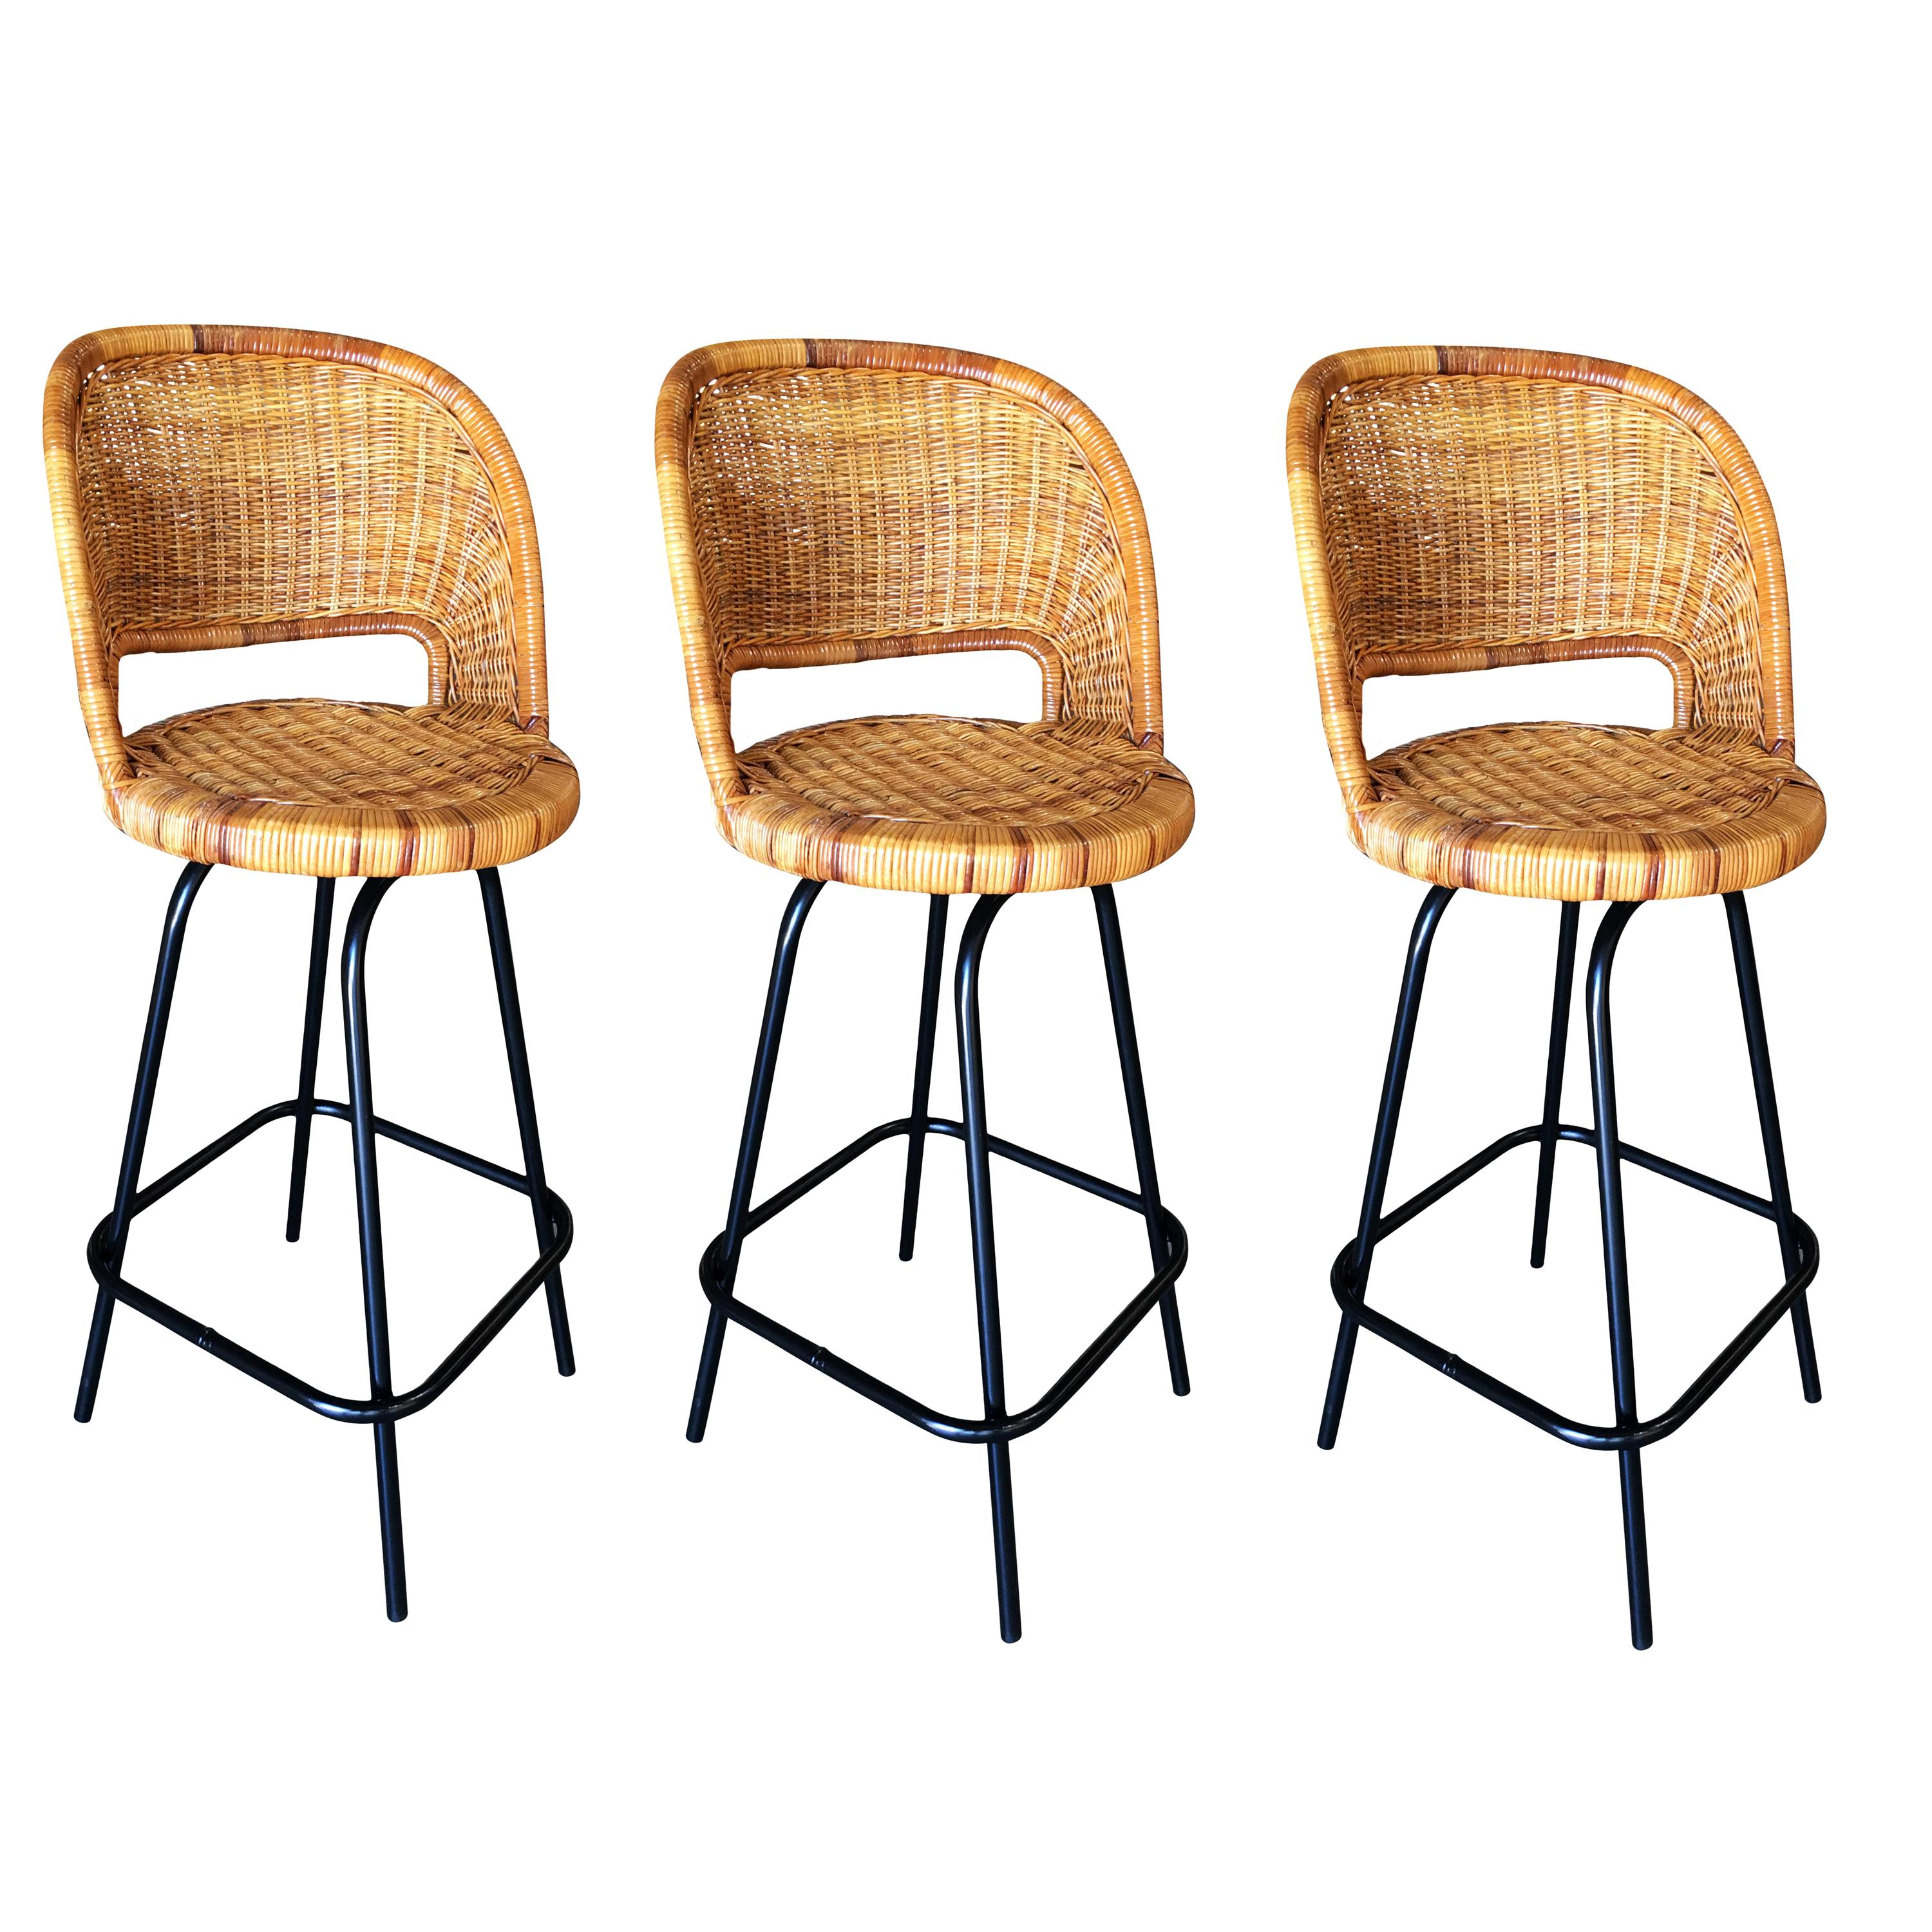 Swivel Wicker Bar Stools in the Seng of Chicago Style, Set of 3